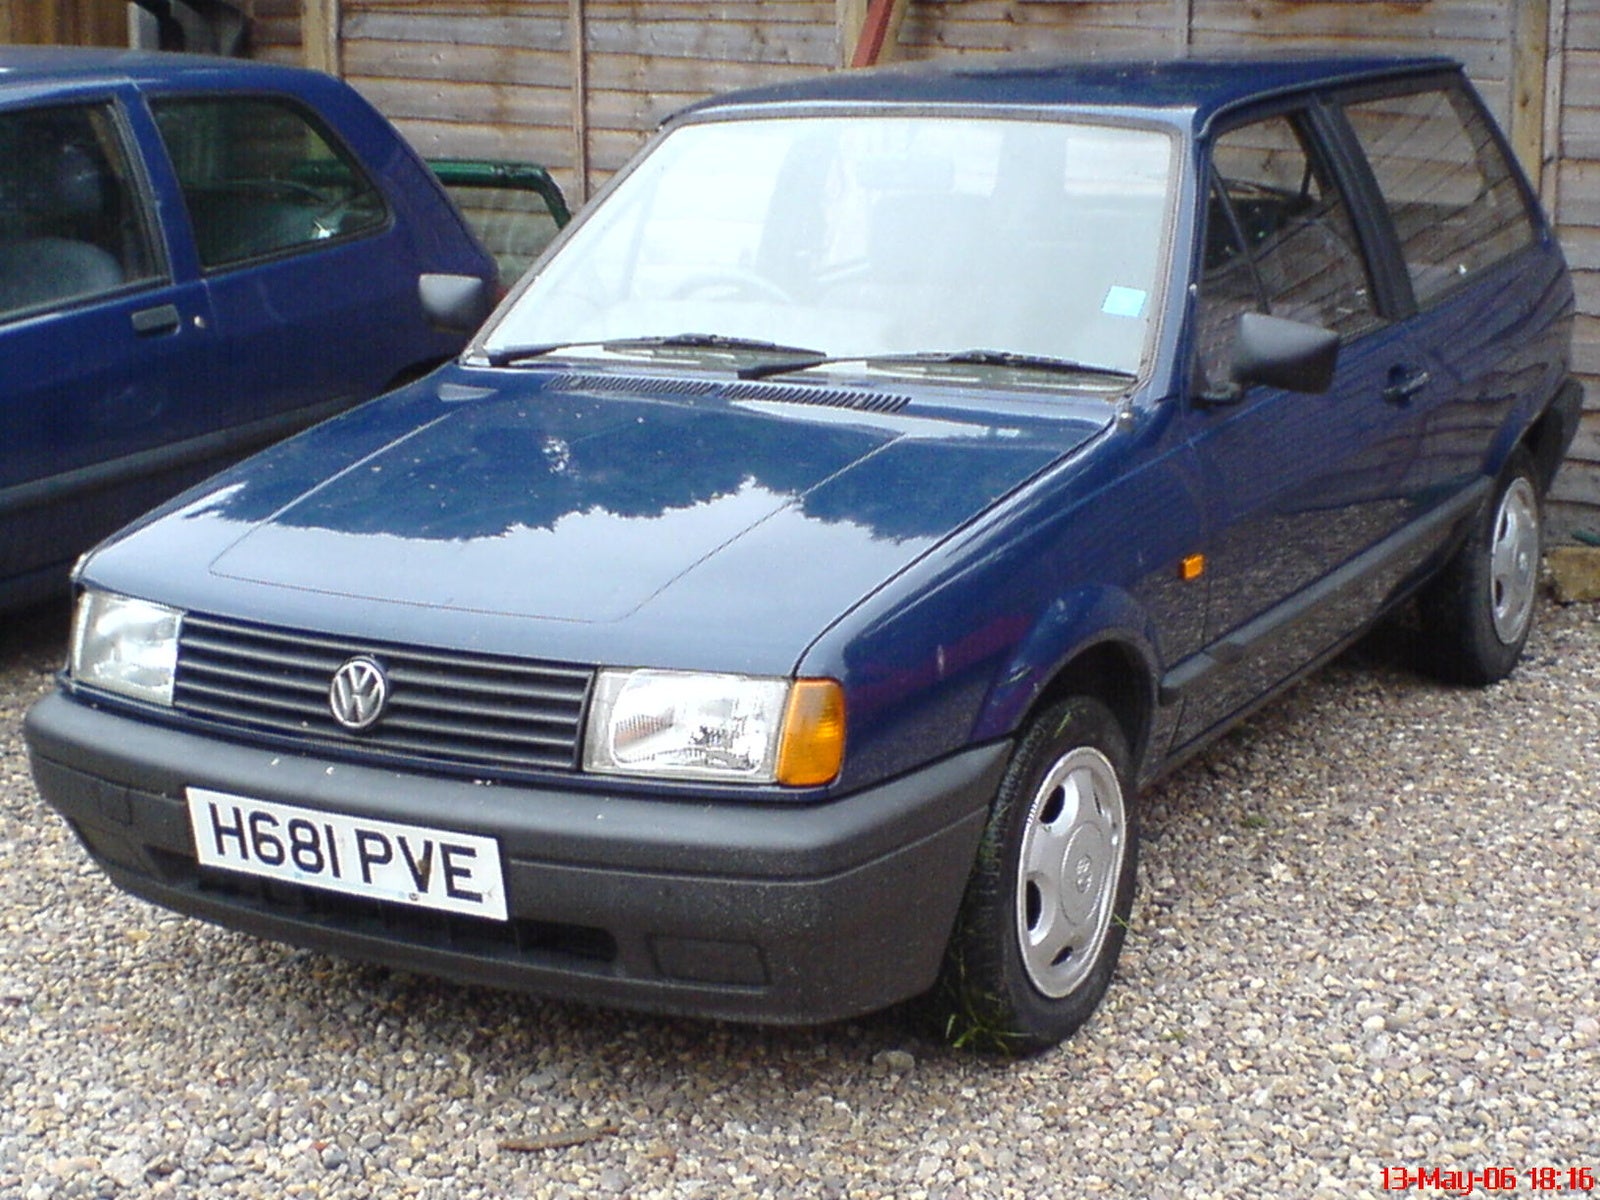 1991 Volkswagen Polo Other Pictures CarGurus